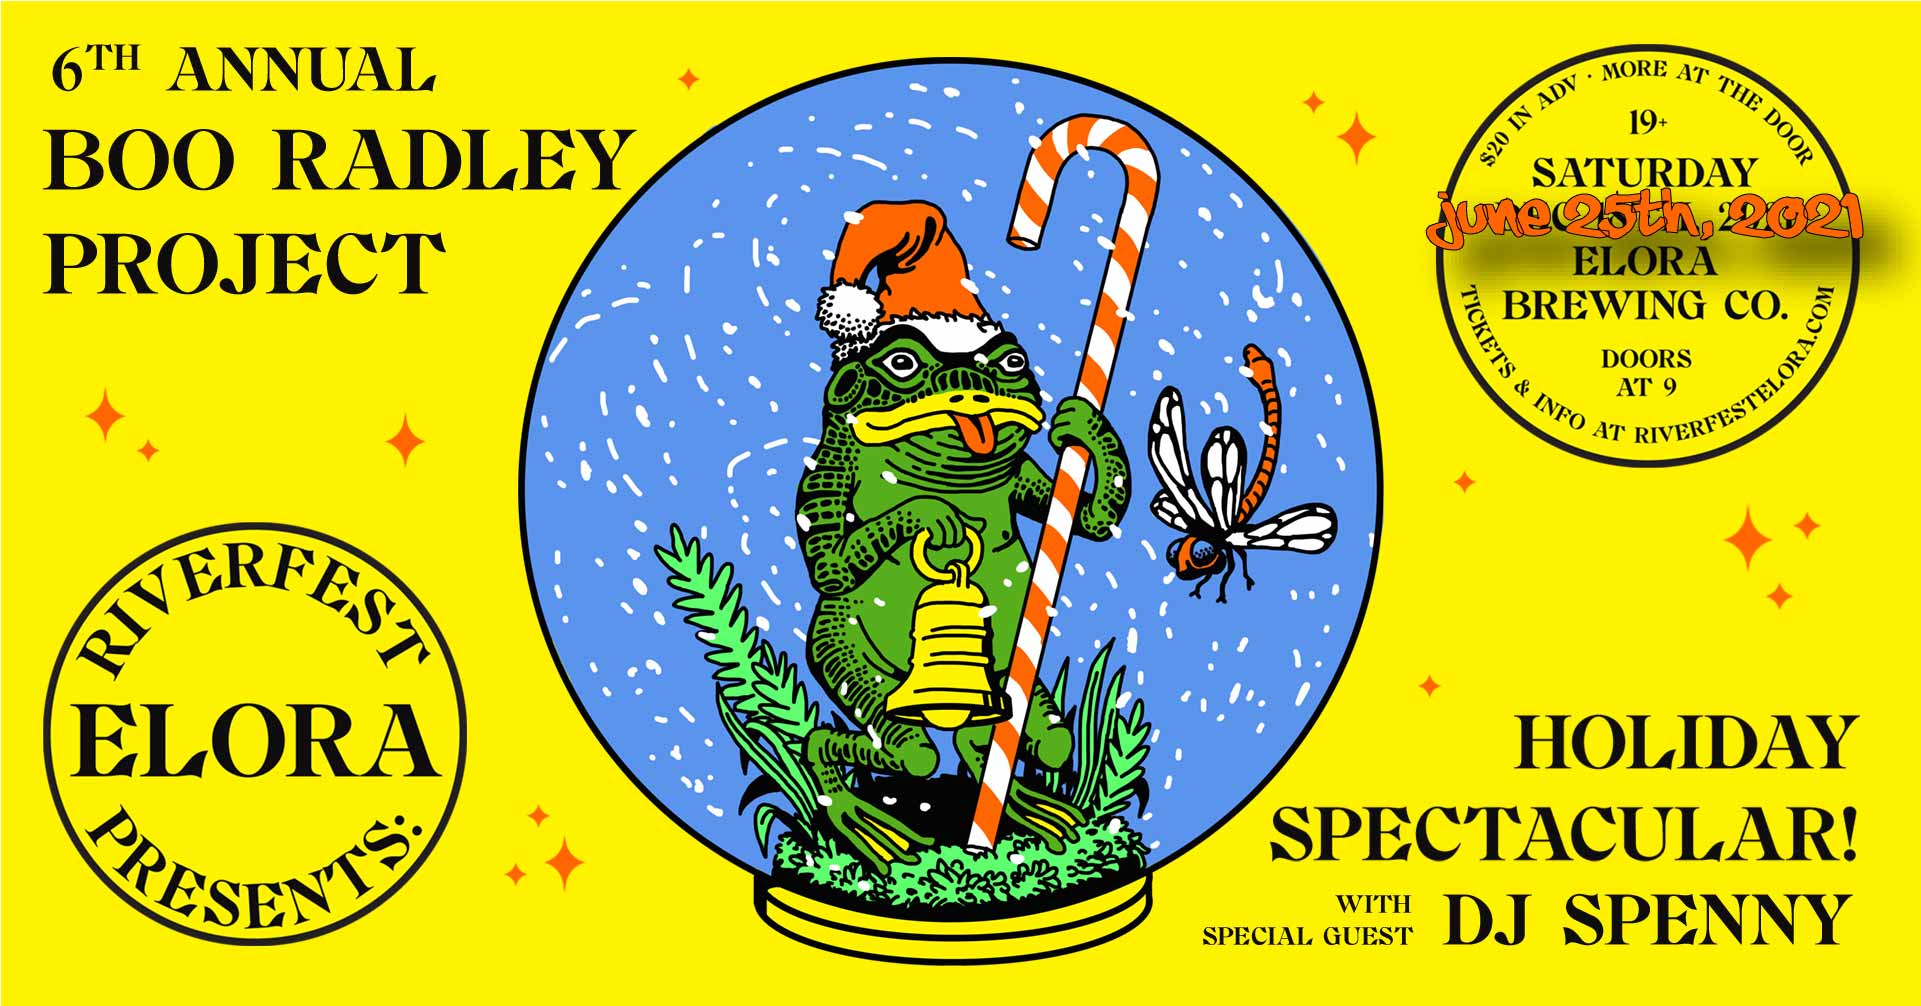 The 6th Annual Boo Radley Project Holiday Spectacular! 